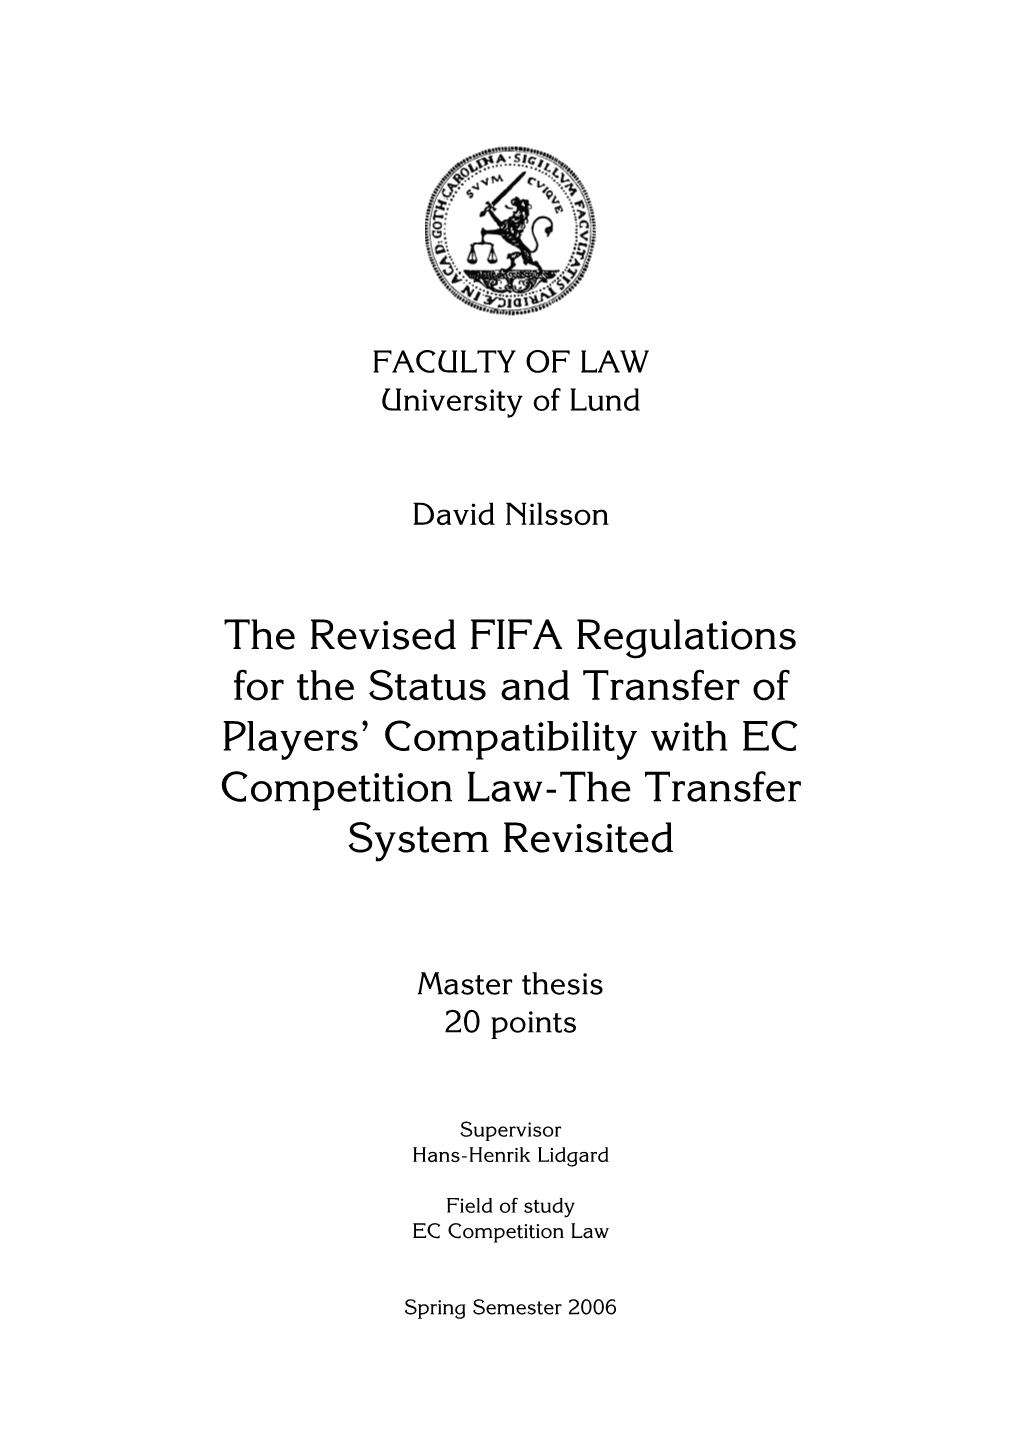 The Revised FIFA Regulations for the Status and Transfer of Players’ Compatibility with EC Competition Law-The Transfer System Revisited